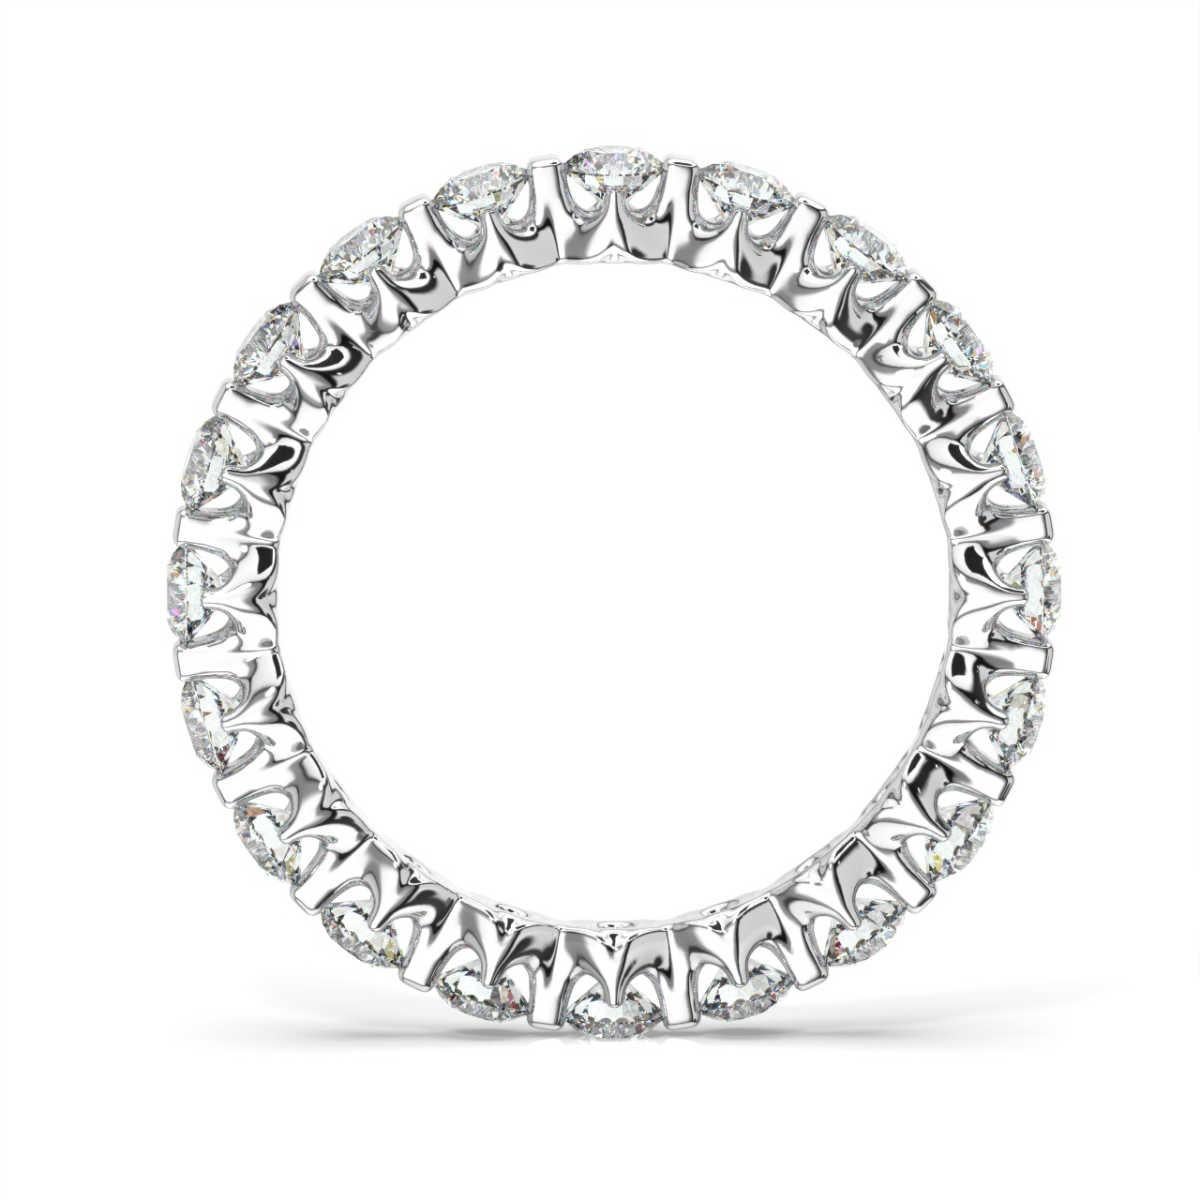 This stunning eternity ring features perfectly matched round brilliant diamonds flouting and set low to minimize the metal exposure. Experience the difference!

Product details: 

Center Gemstone Color: WHITE
Side Gemstone Type: NATURAL DIAMOND
Side